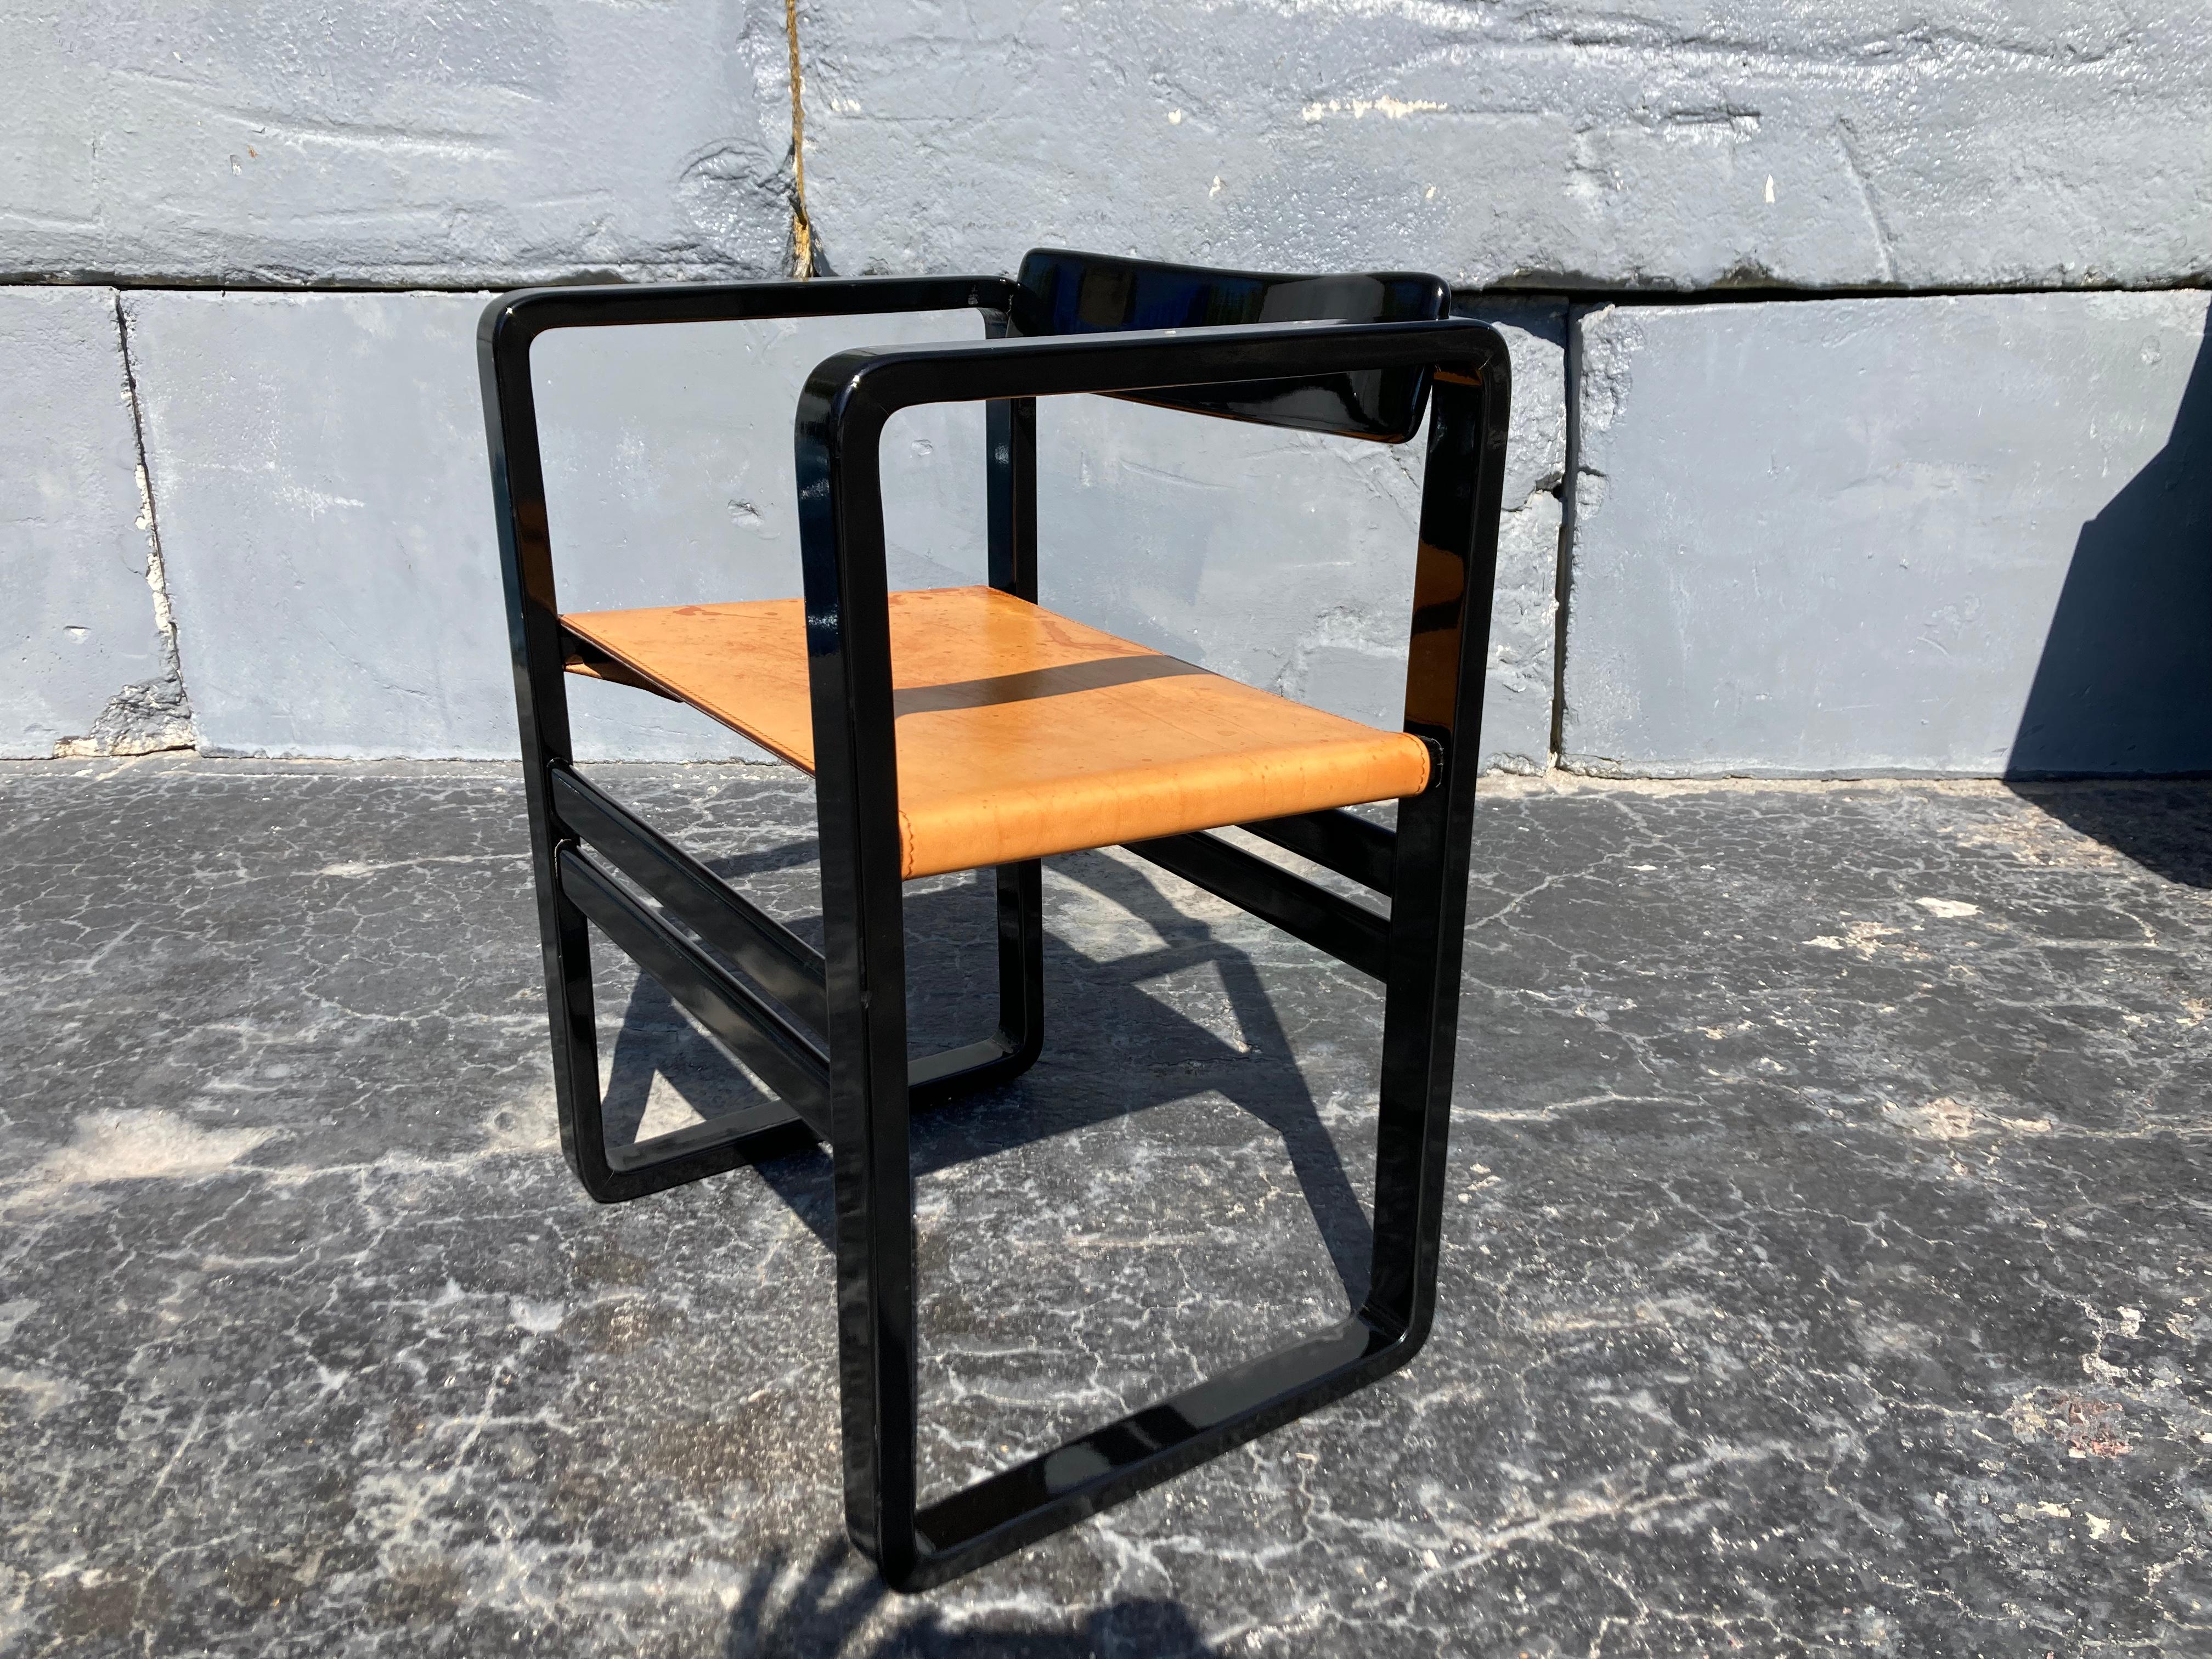 Black lacquered wood arm chair with beautiful saddle leather seat, the back swivels.
Arm height is 27”.